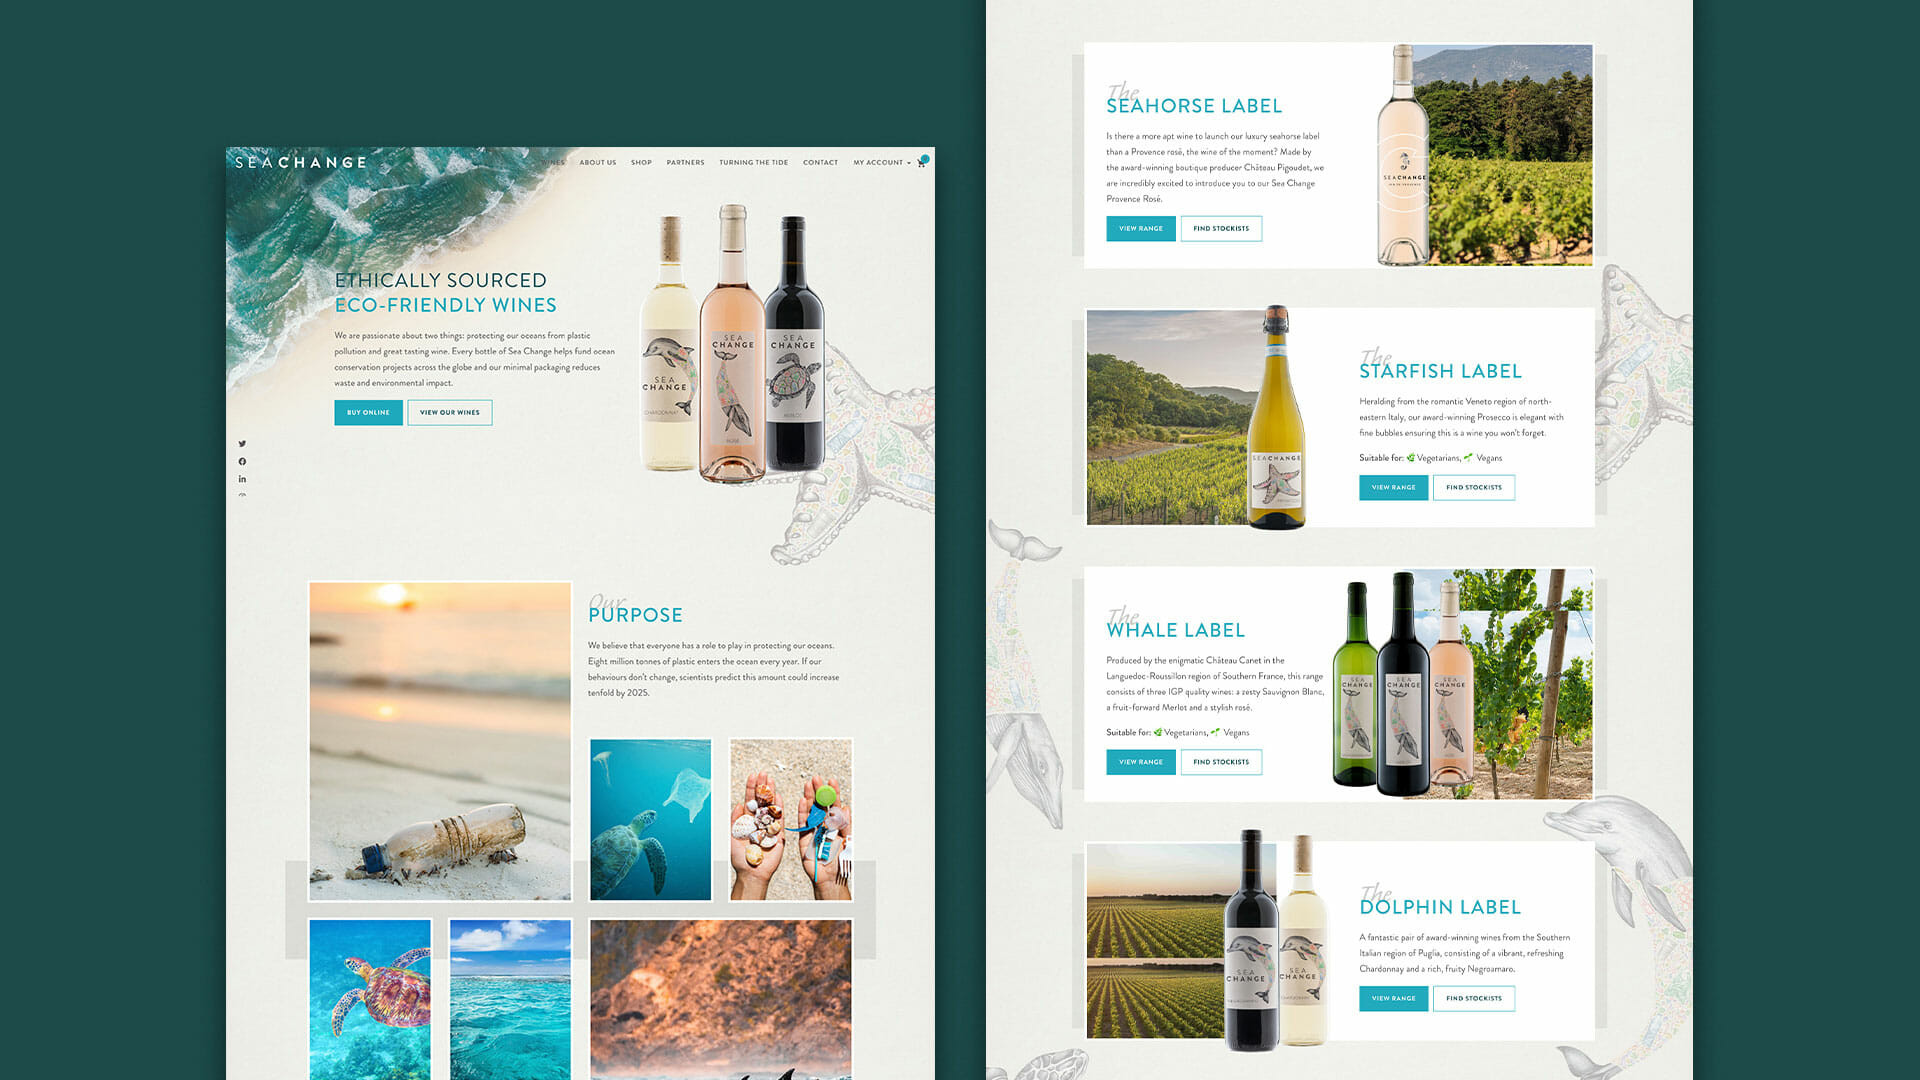 Seachange website redesign with sustability in mind